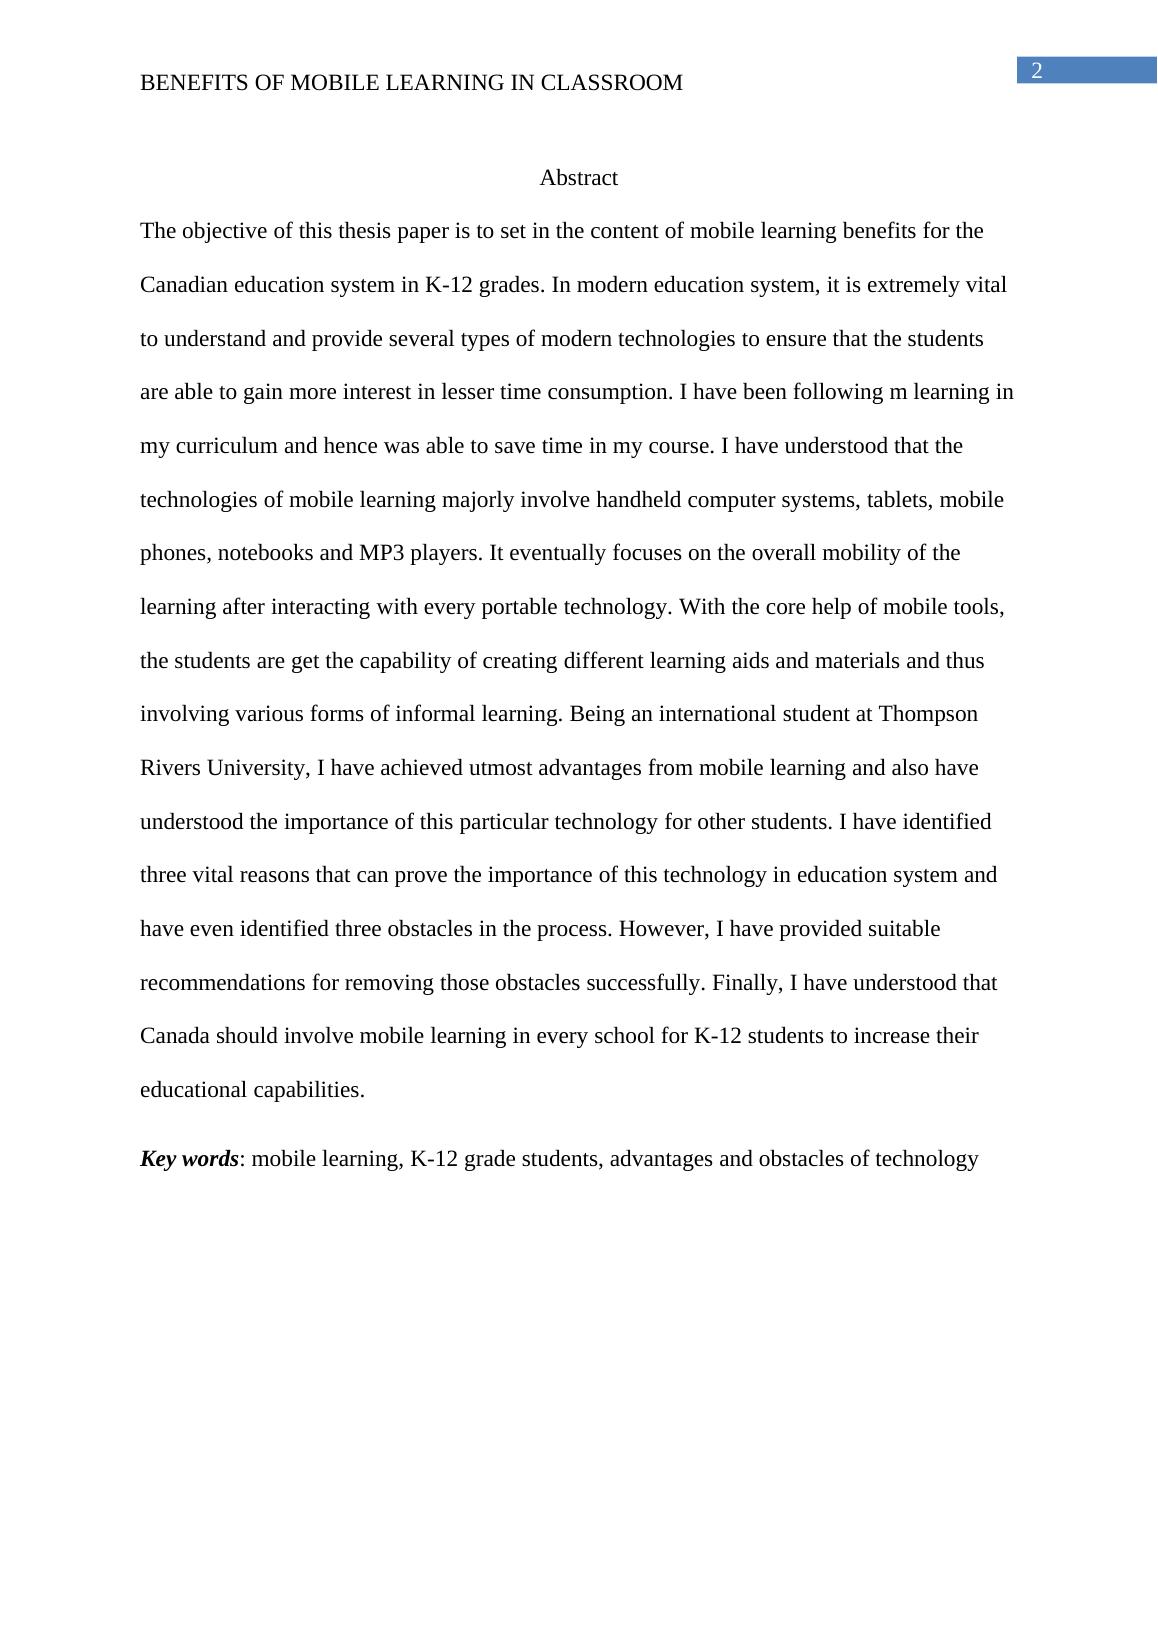 The objective of this thesis paper is to set in the content of mobile learning benefits_2